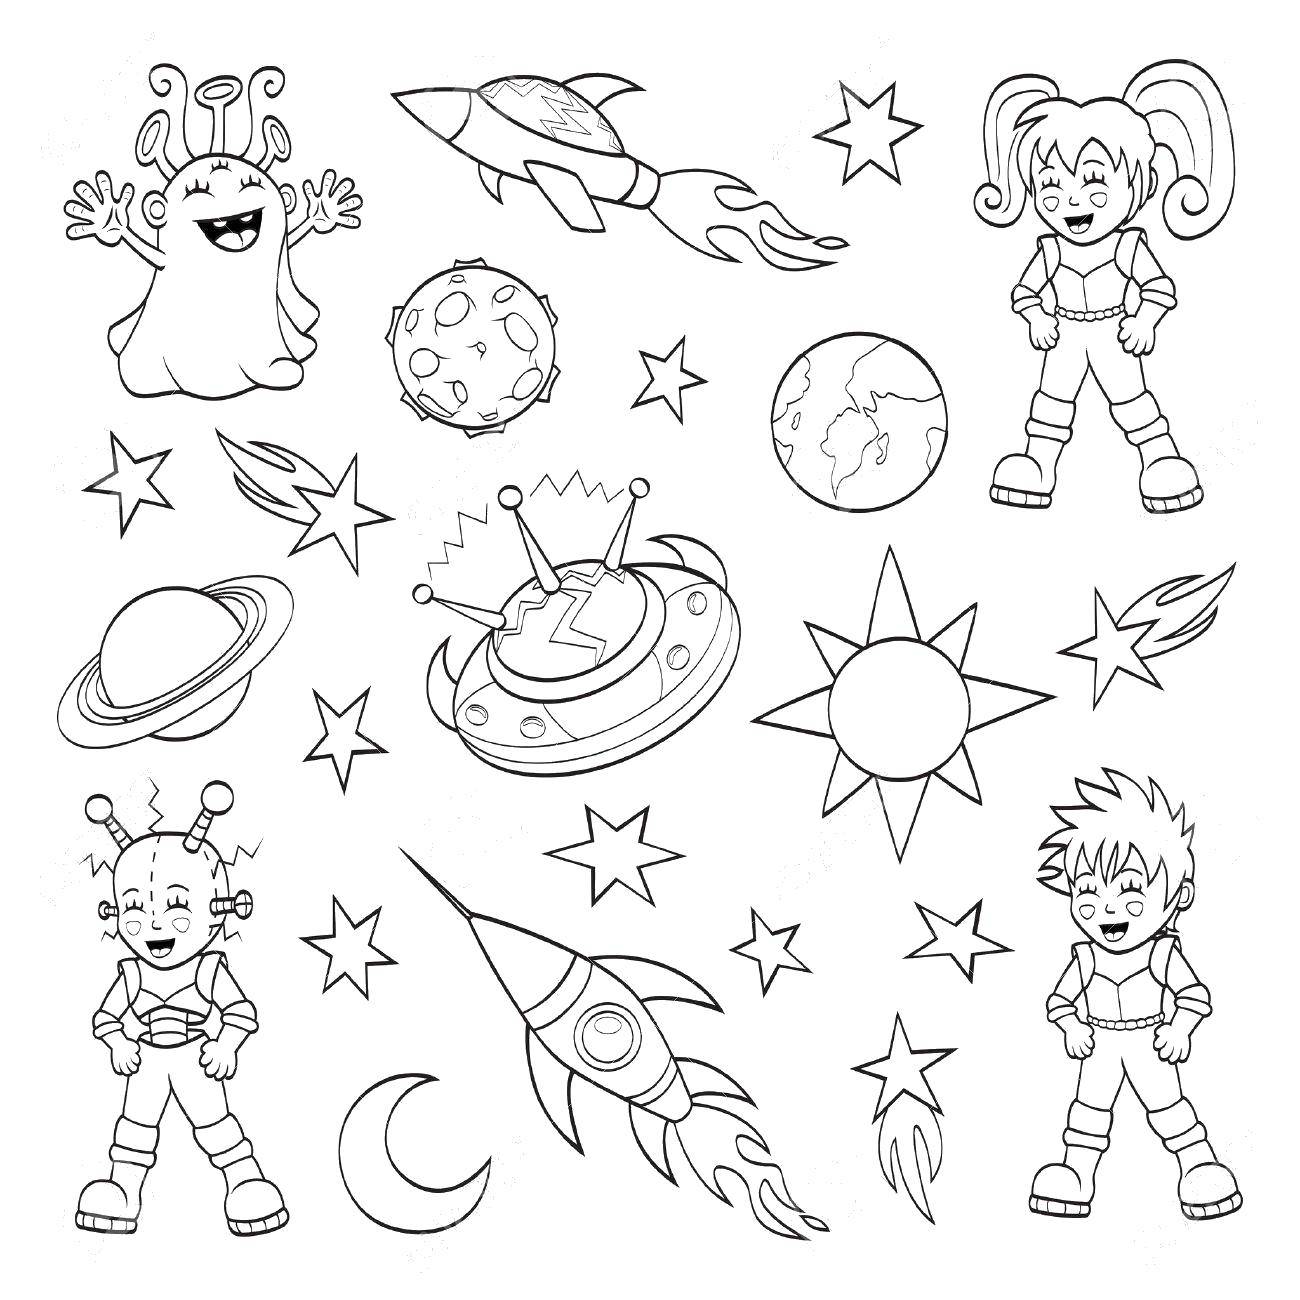 Coloring Space stuff. Category Space. Tags:  Space, aliens, stars, rocket, planet, astronaut, universe.